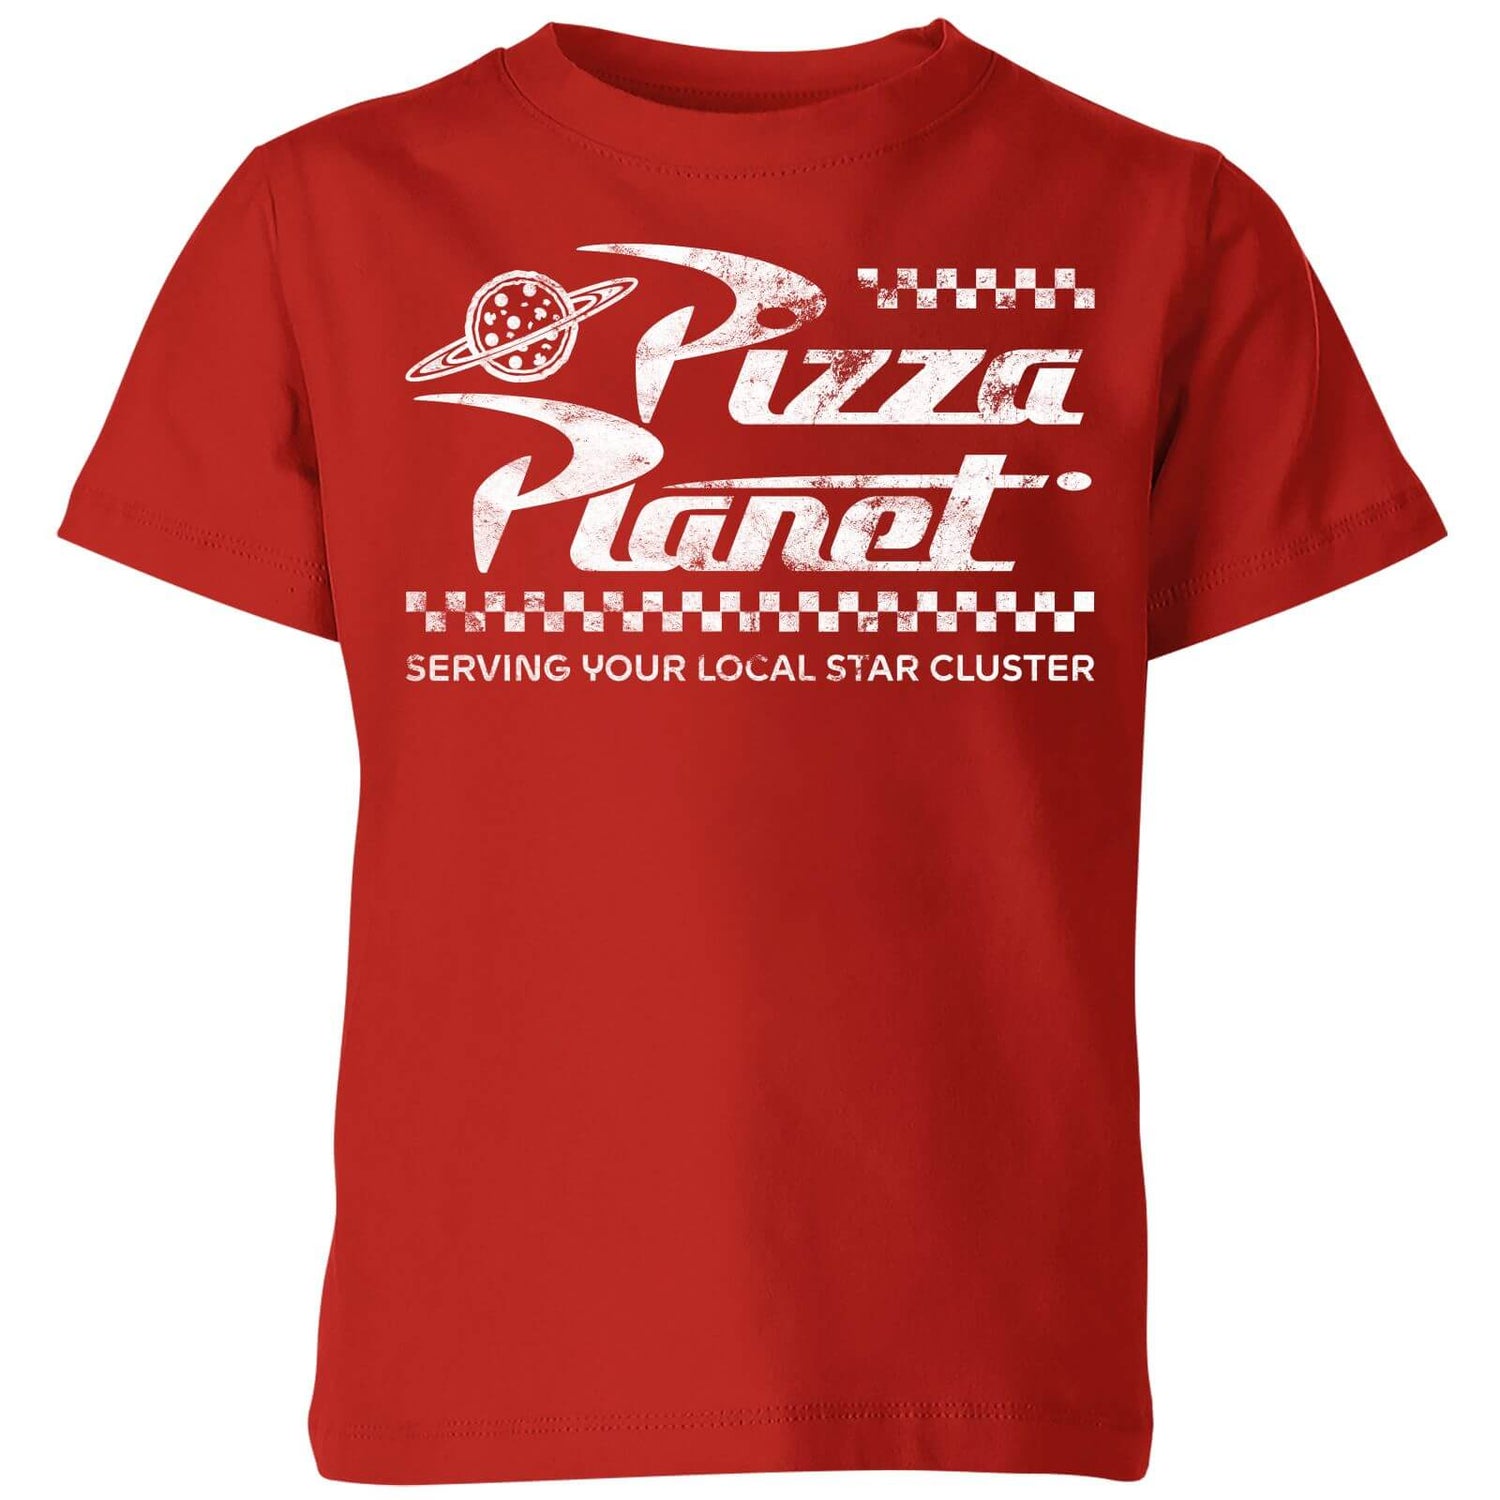 Toy Story x Pizza Planet Crew Kids' T-Shirt - Red